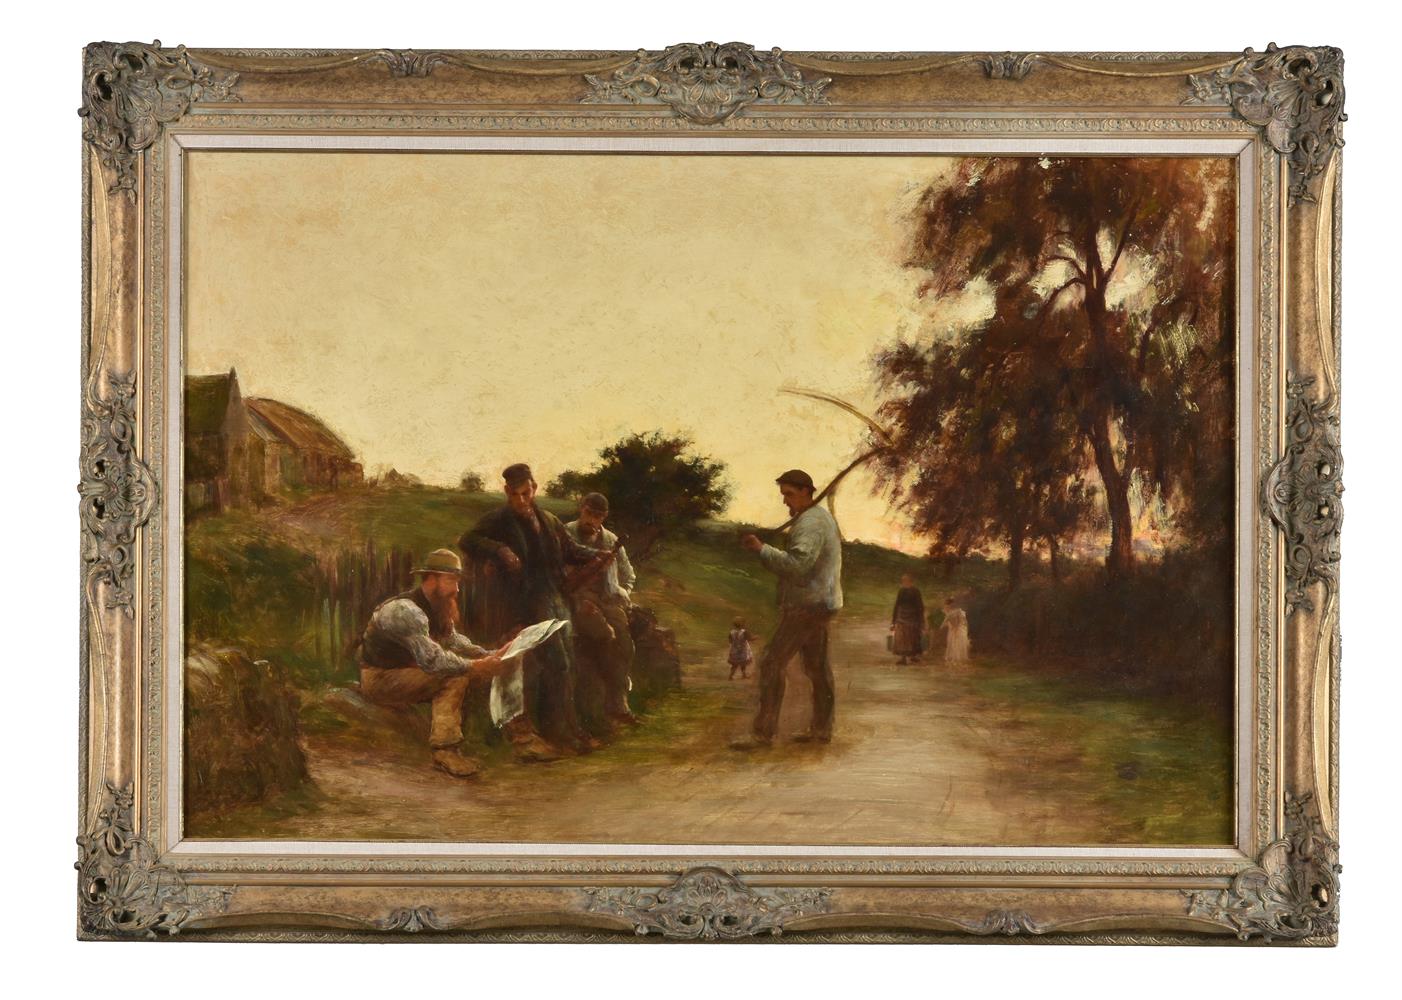 Attributed to William Darling Mckay (British 1844-1924), Harvesters at rest in a landscape - Image 2 of 3